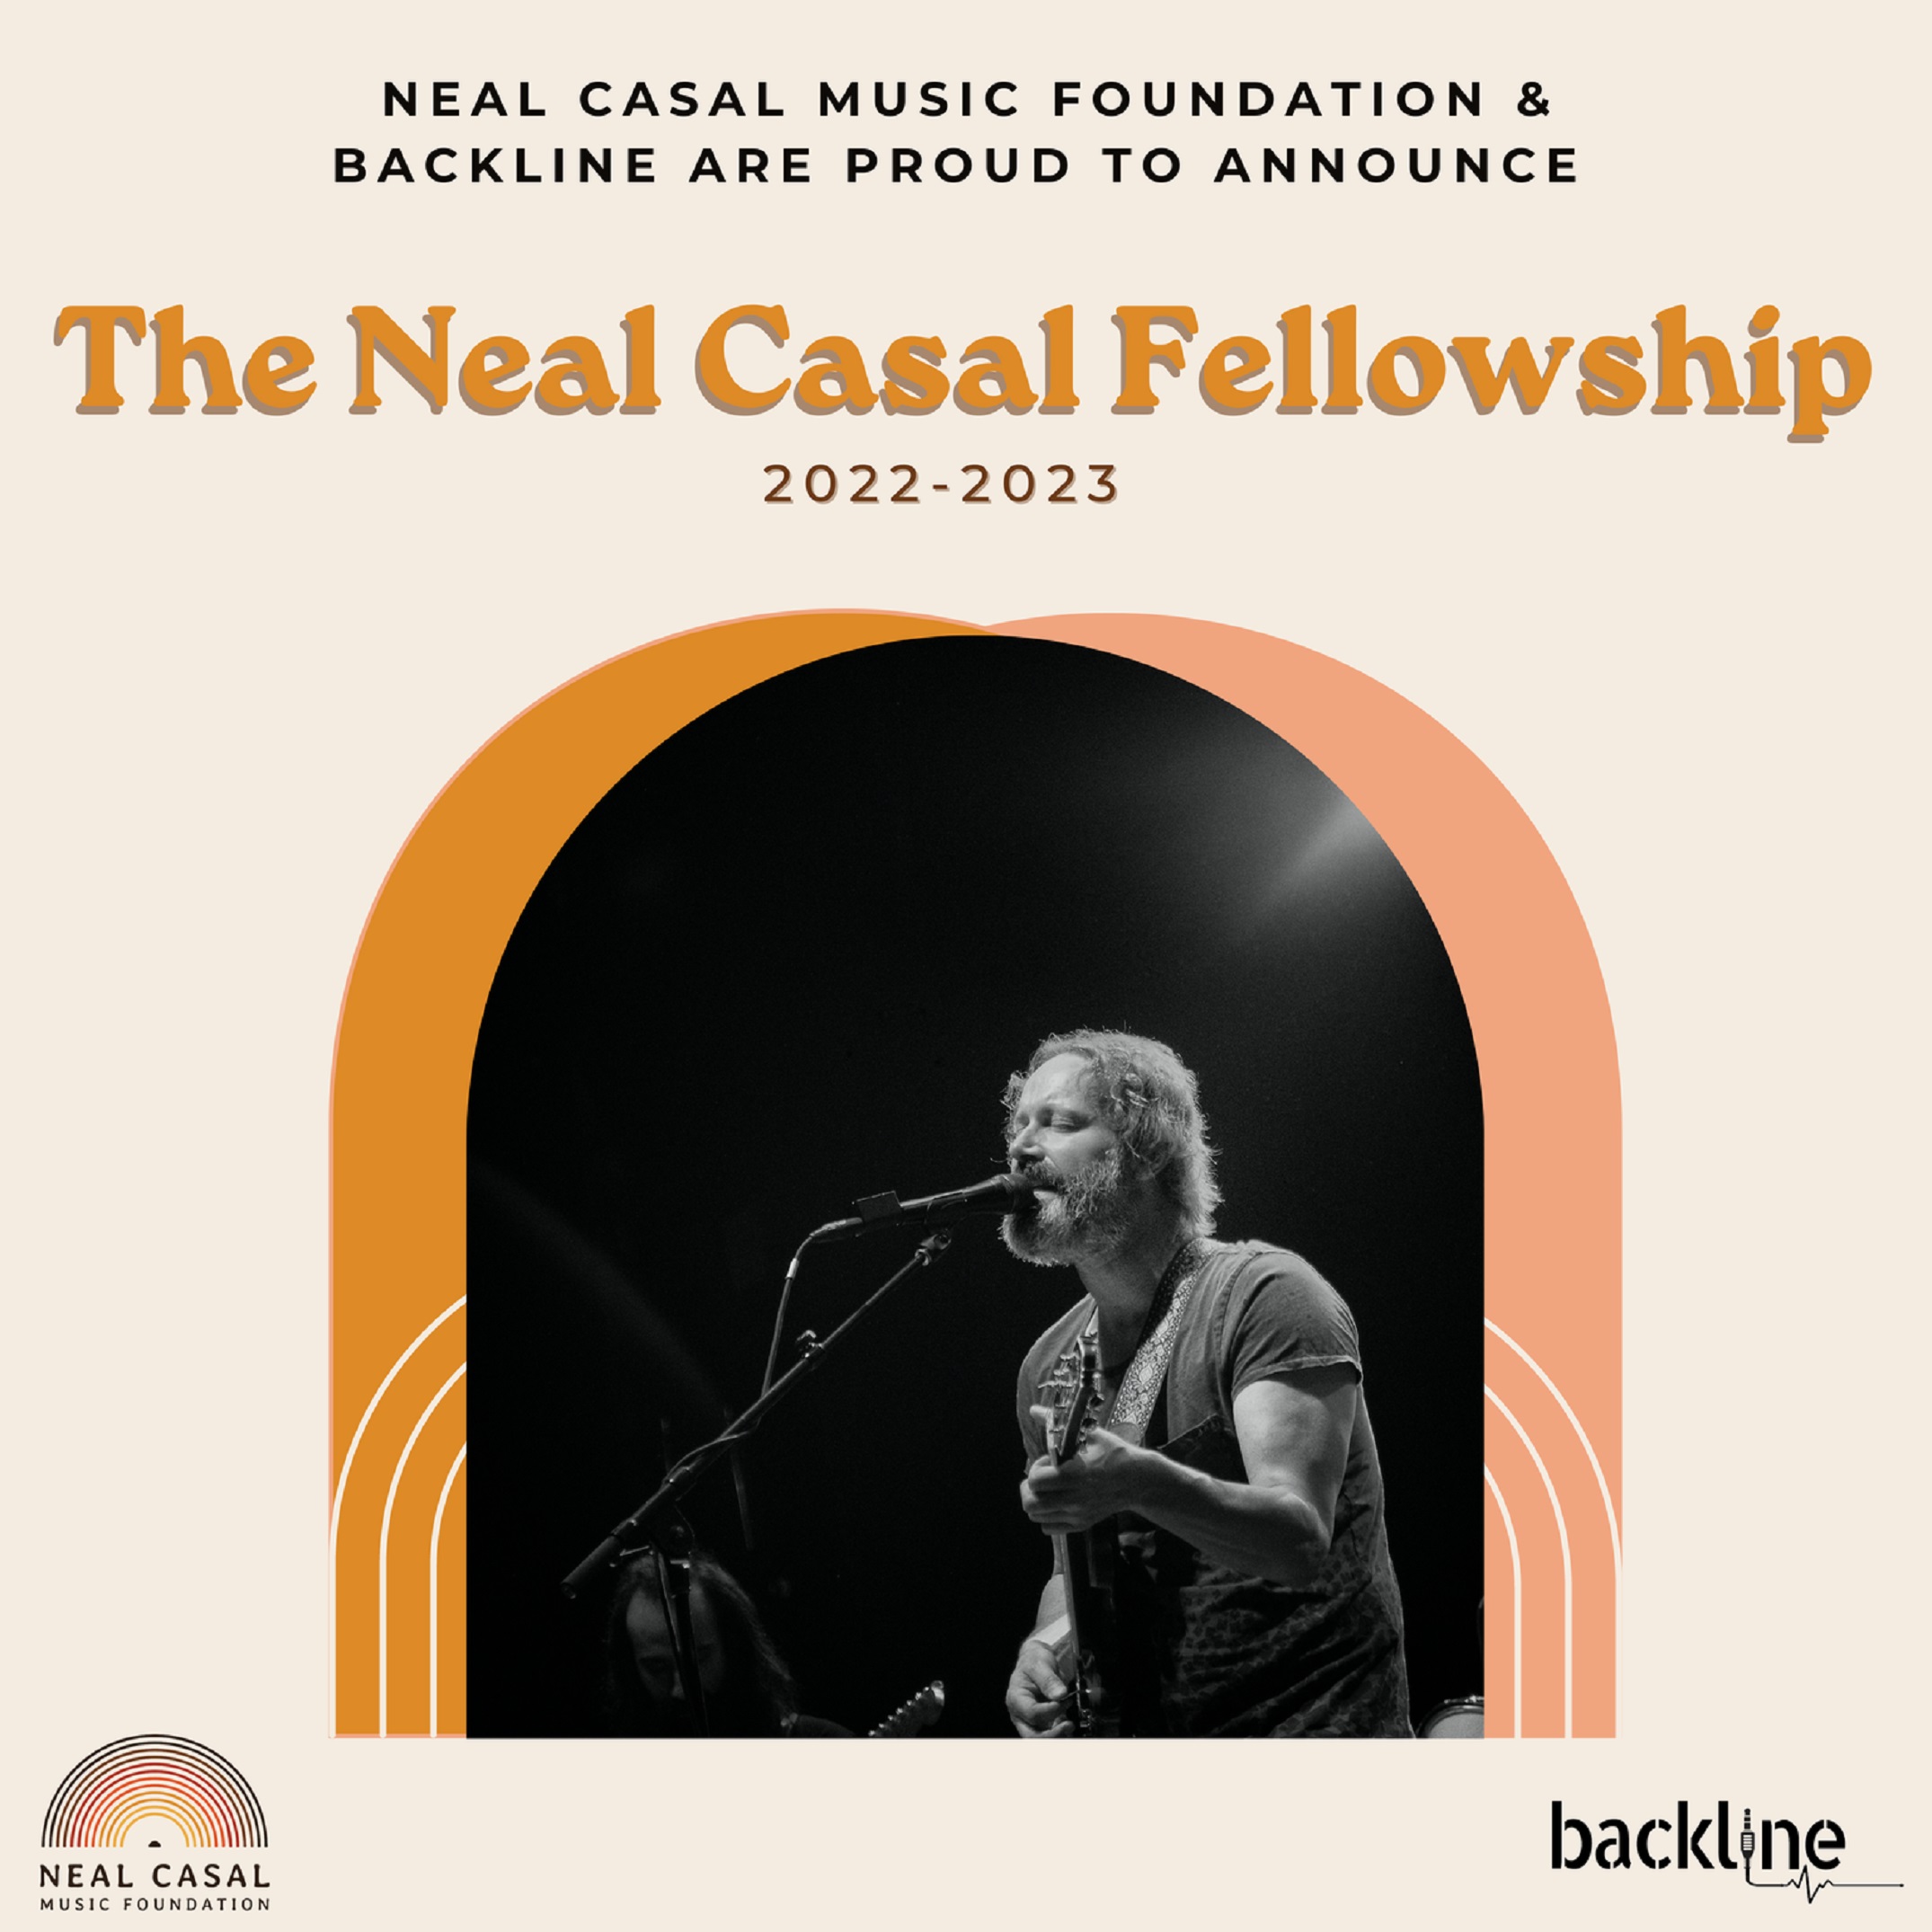 Neal Casal Fellowship Announced On 3rd Anniversary Of Late Artist's Passing